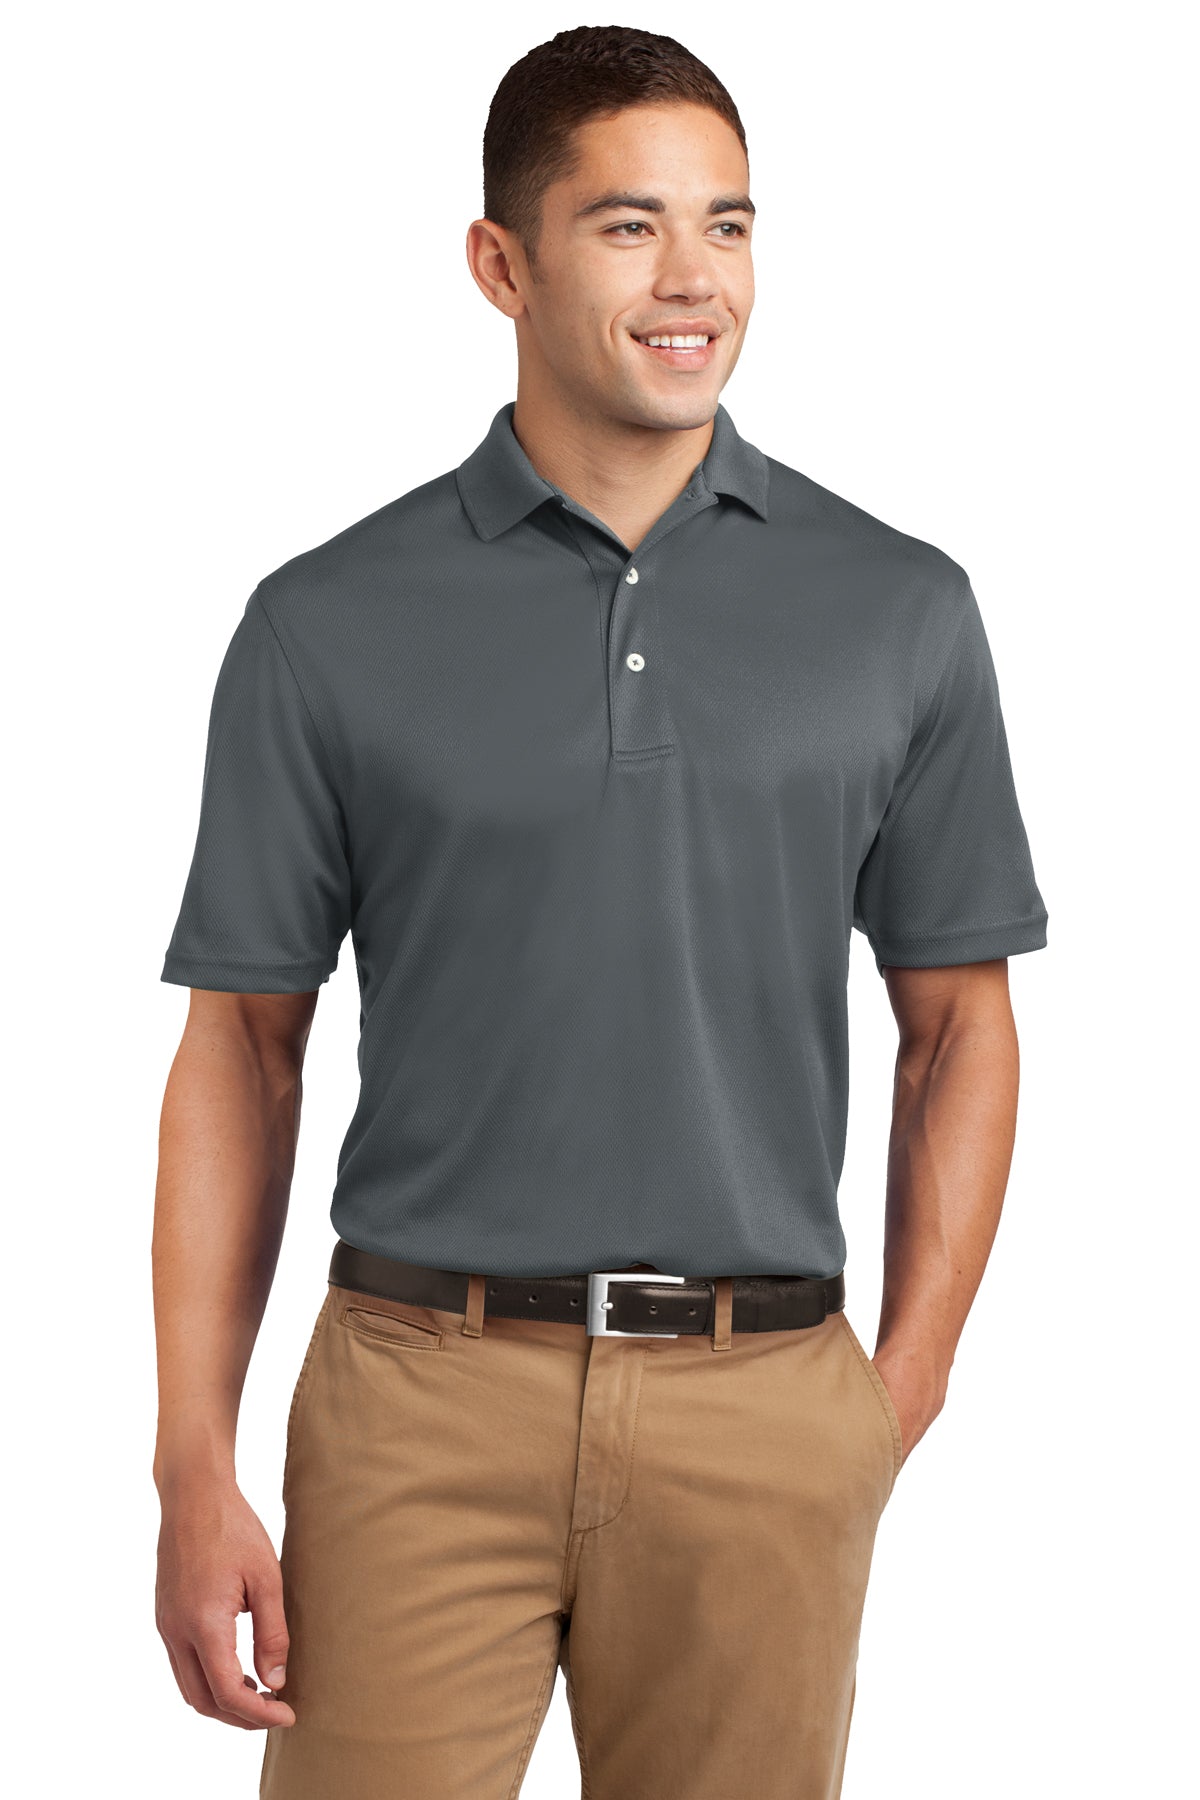 Custom Embroidered Polos - Sports